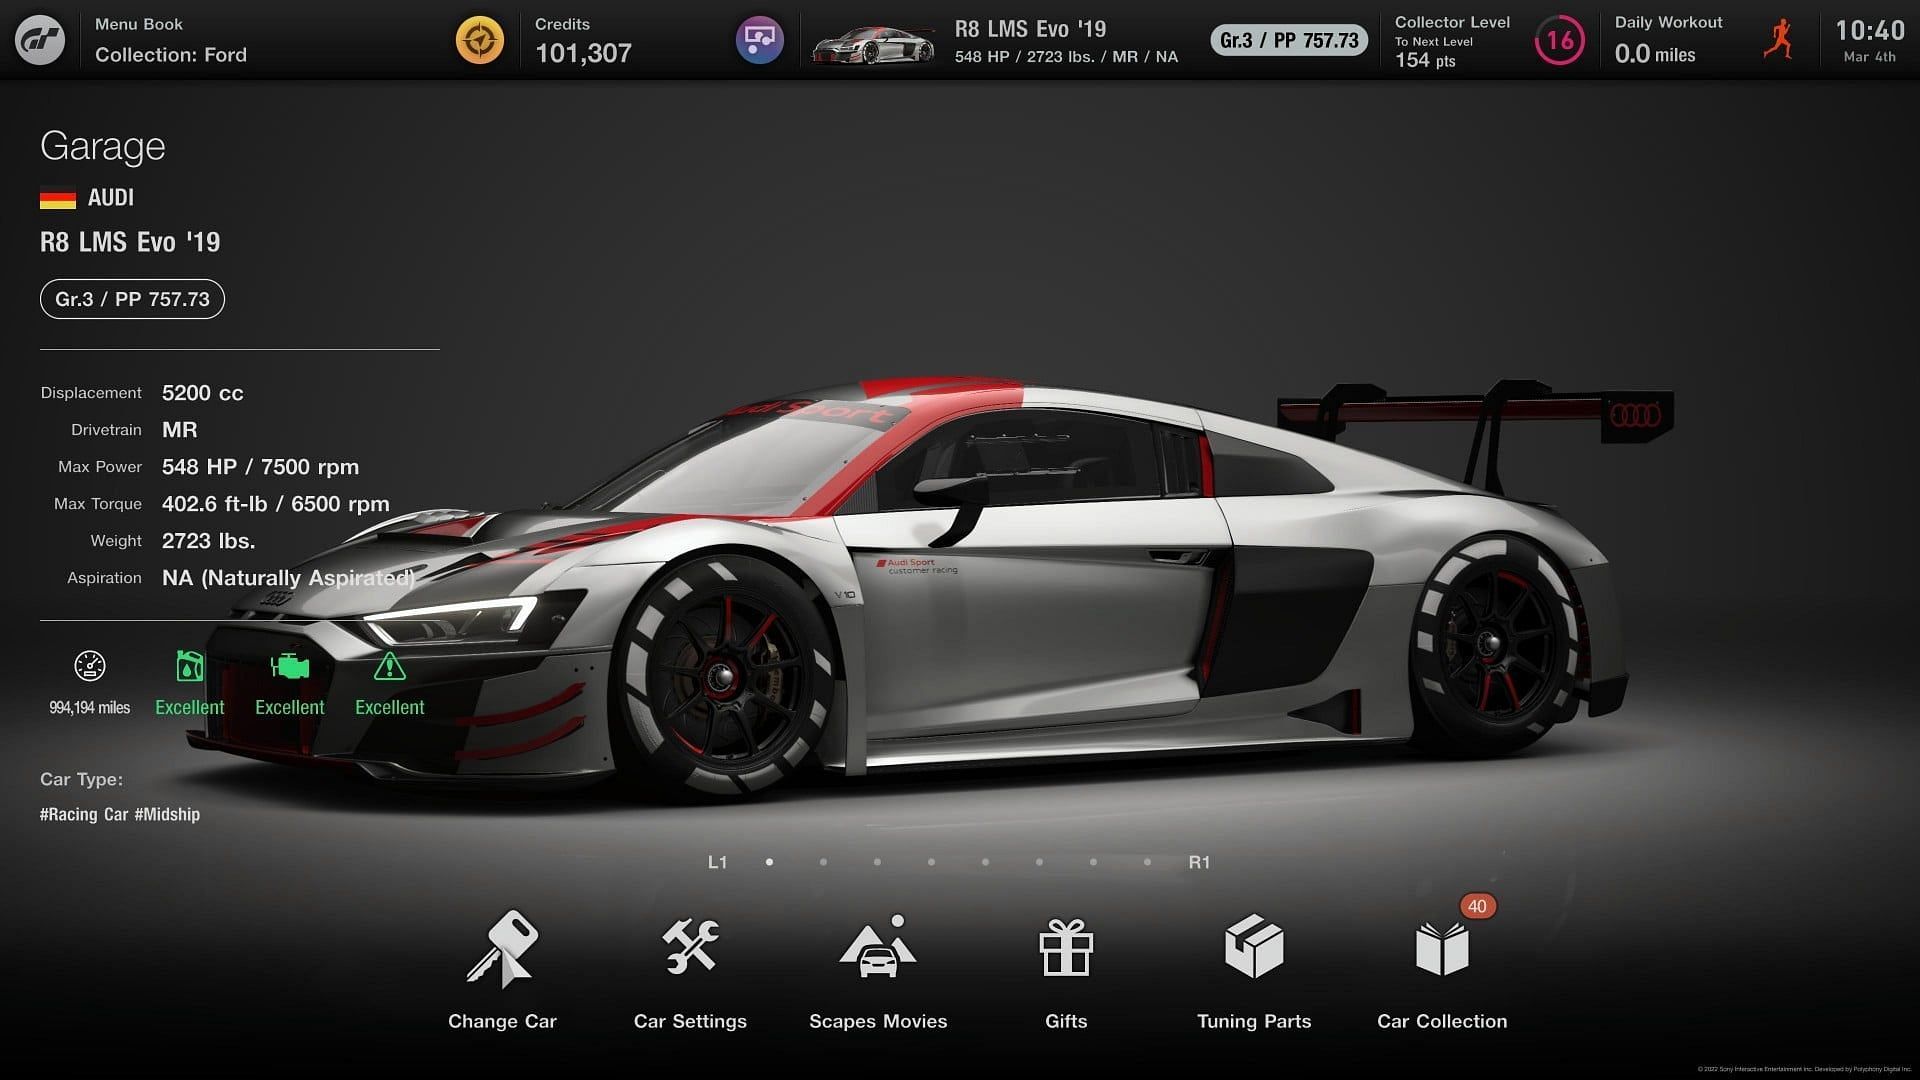 While not a road car, the Audi R8 LMS Evo &#039;19 is not to be slept on (Image via Sony)